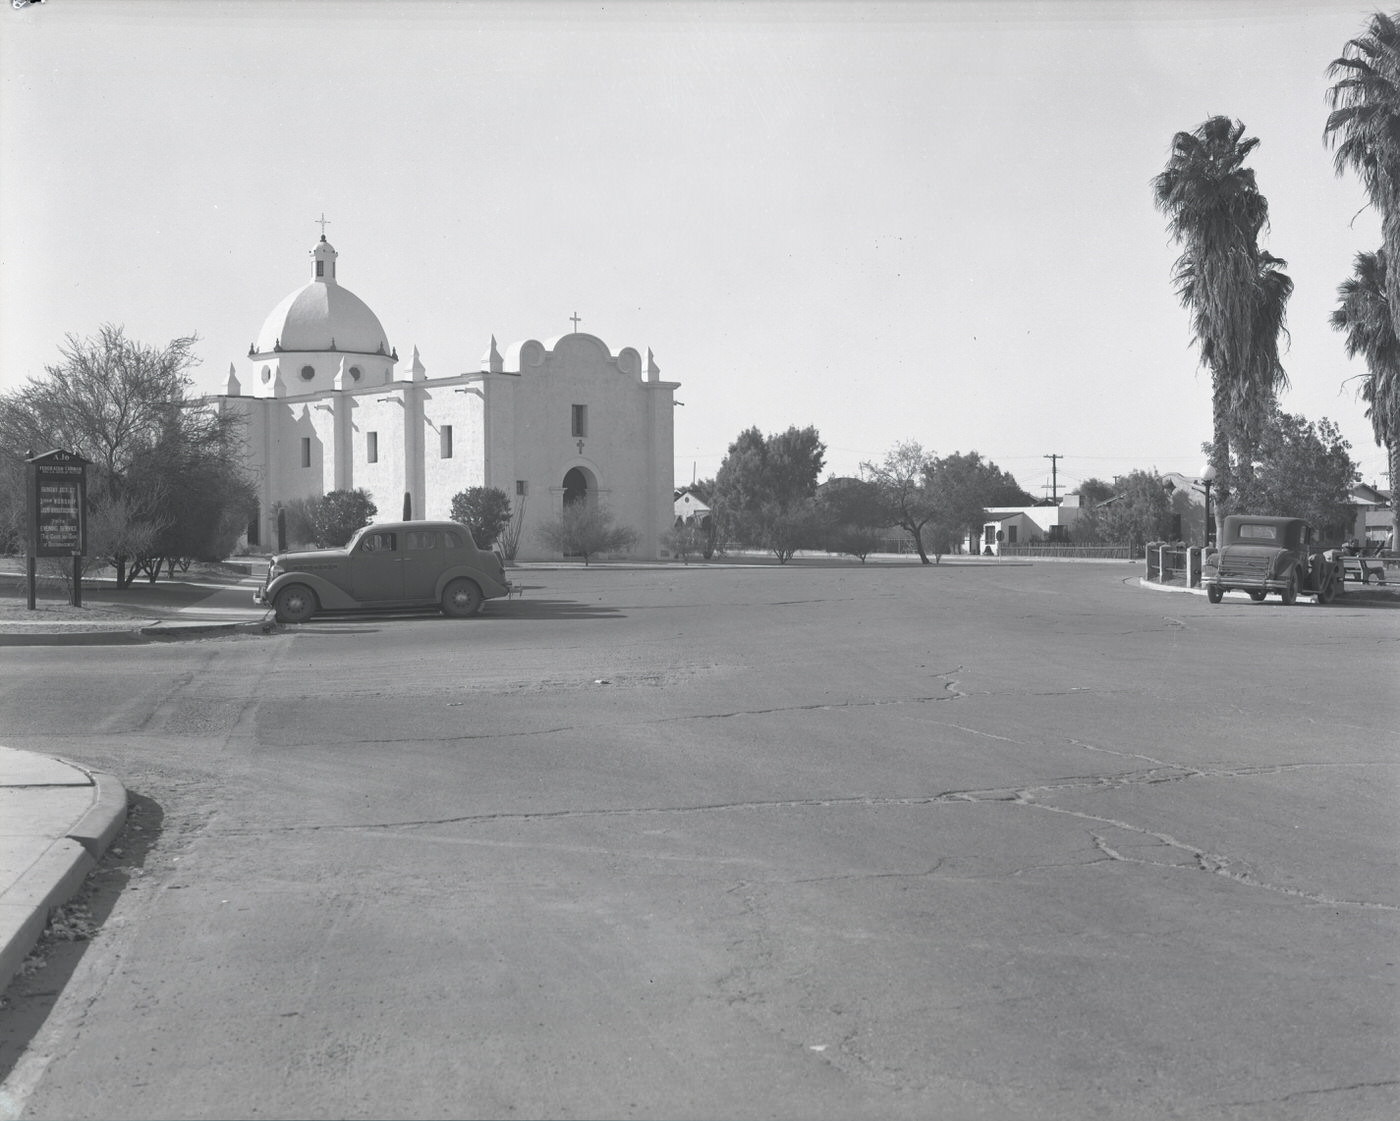 Immaculate Conception Catholic Church in Ajo, Arizona, 1930s